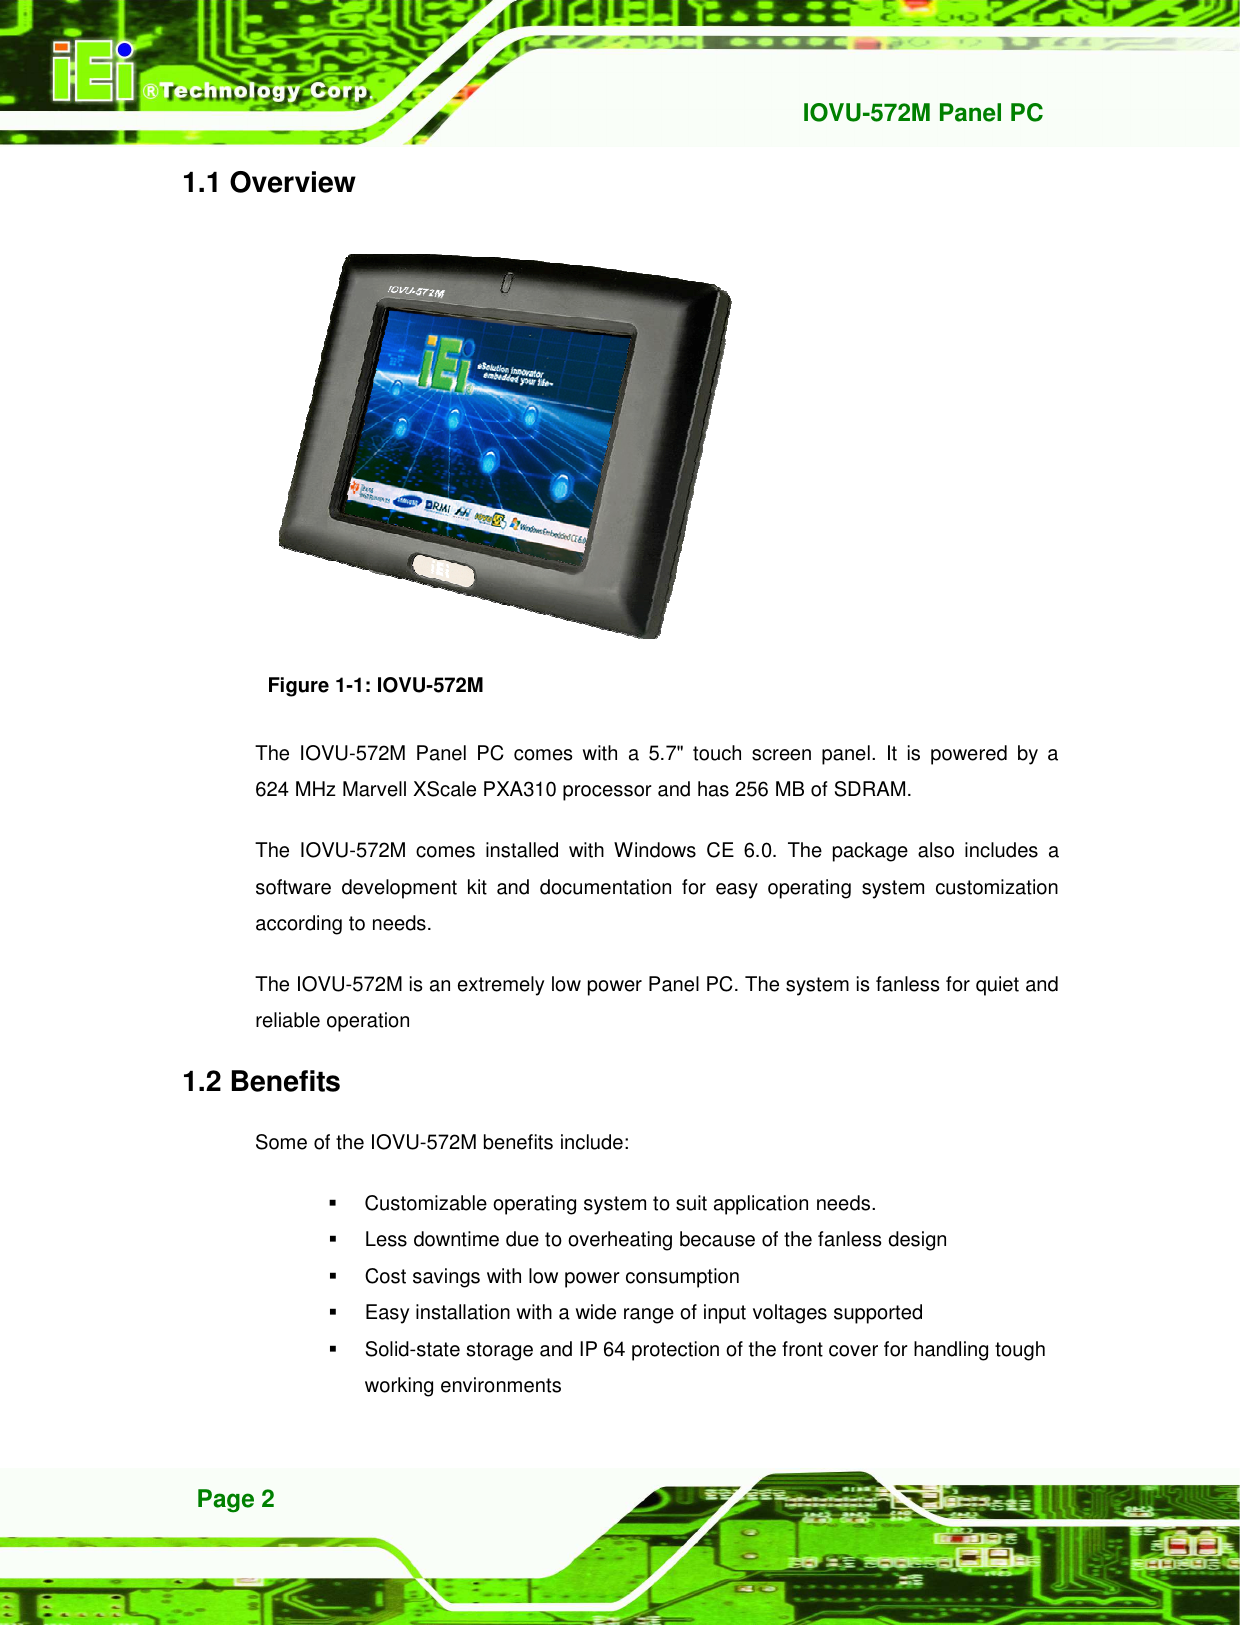   IOVU-572M Panel PC Page 2 1.1 Overview  Figure 1-1: IOVU-572M The  IOVU-572M  Panel  PC  comes  with  a  5.7&quot;  touch  screen  panel.  It  is  powered  by  a 624 MHz Marvell XScale PXA310 processor and has 256 MB of SDRAM. The  IOVU-572M  comes  installed  with  Windows  CE  6.0.  The  package  also  includes  a software  development  kit  and  documentation  for  easy  operating  system  customization according to needs. The IOVU-572M is an extremely low power Panel PC. The system is fanless for quiet and reliable operation 1.2 Benefits Some of the IOVU-572M benefits include:   Customizable operating system to suit application needs.   Less downtime due to overheating because of the fanless design   Cost savings with low power consumption   Easy installation with a wide range of input voltages supported   Solid-state storage and IP 64 protection of the front cover for handling tough working environments 